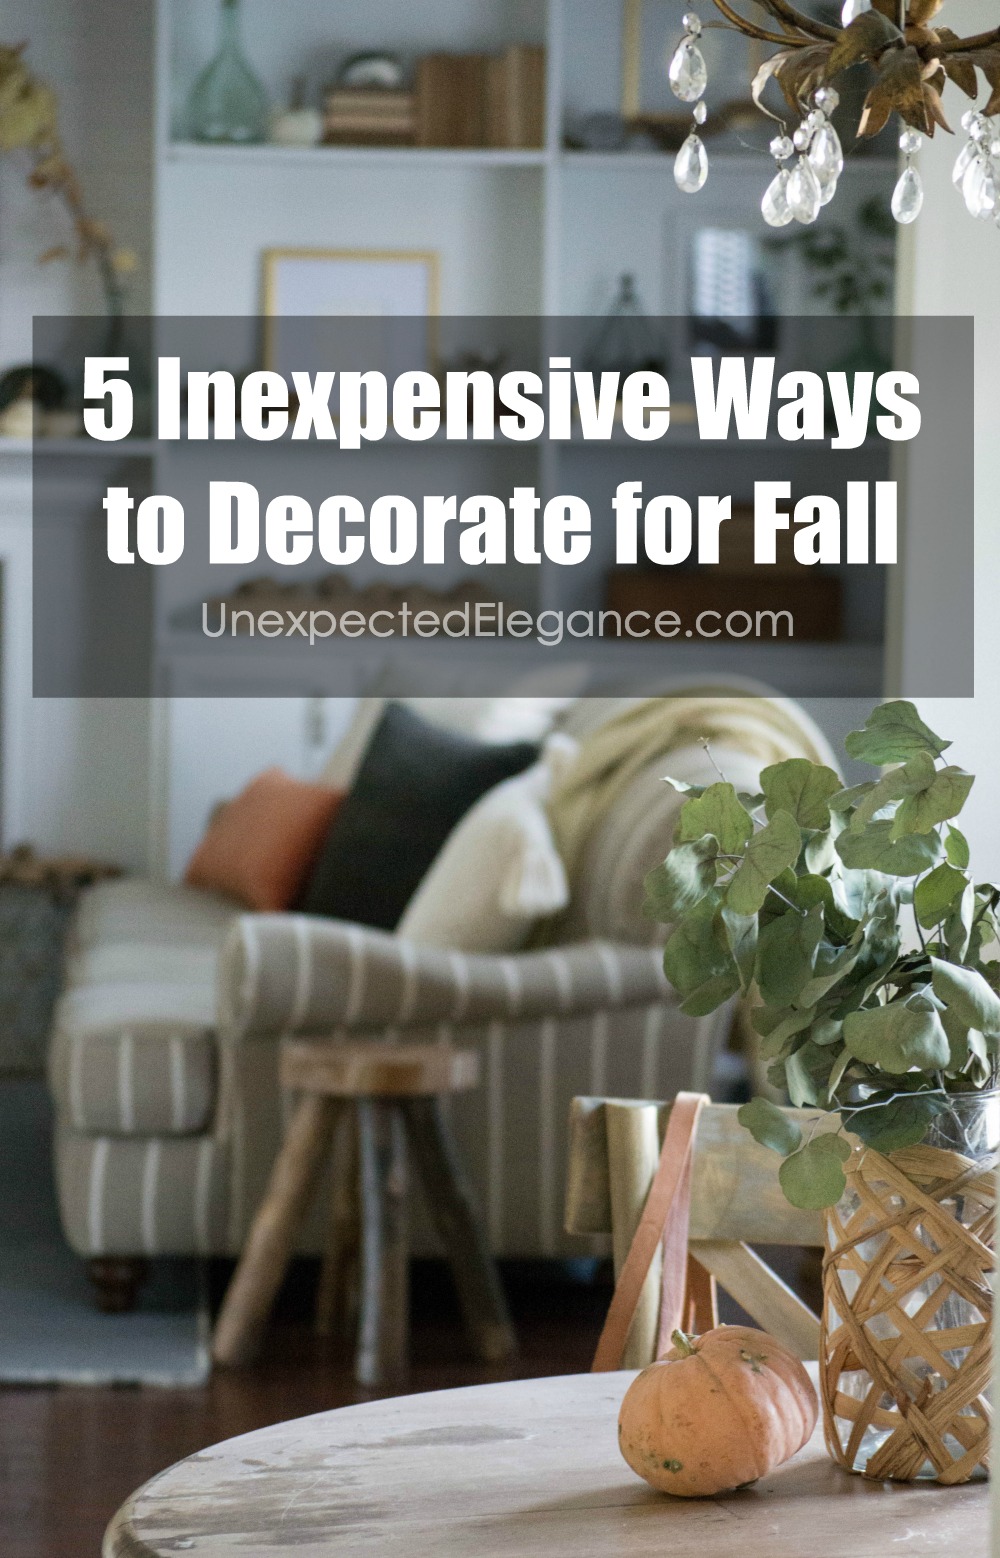 Want to decorate for fall but don't have it in the budget?!? Check out these 5 inexpensive ways to decorate for fall and get your home cozy this season!